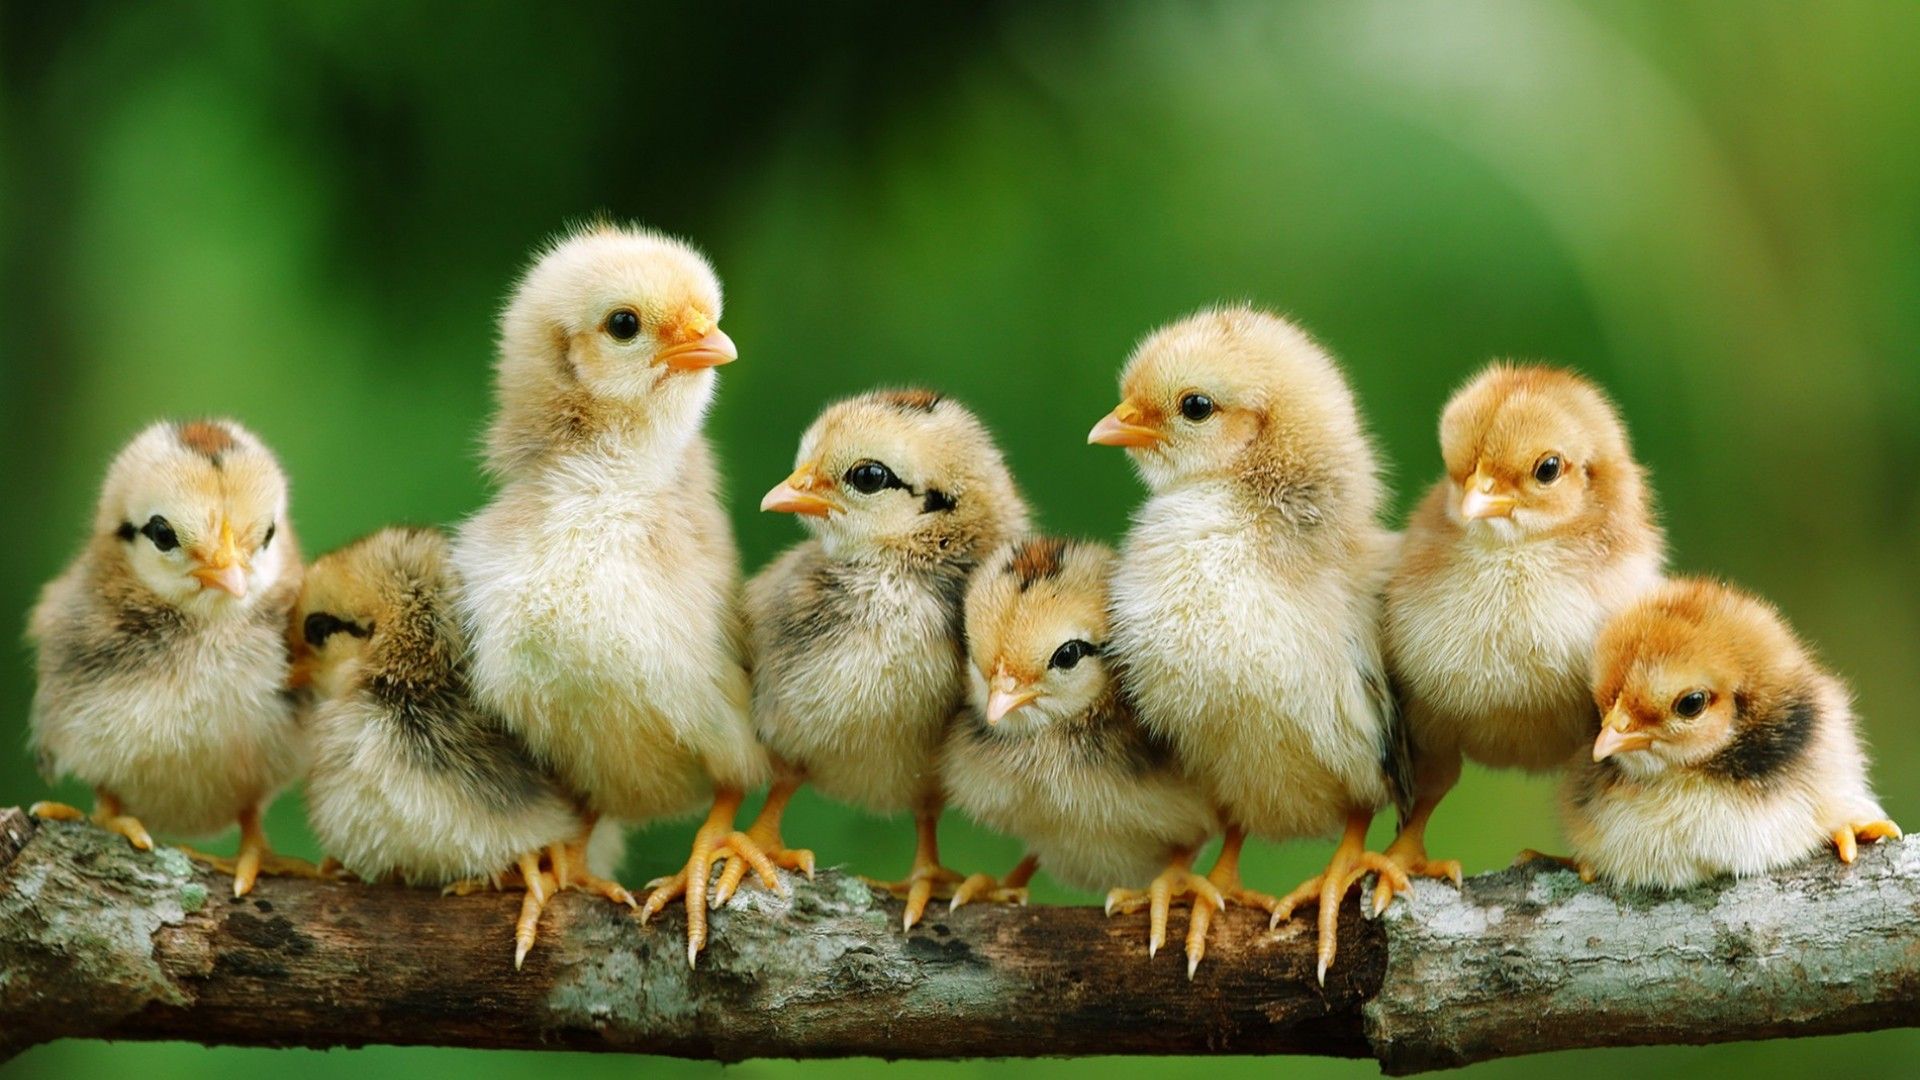 Baby Chick Wallpaper Free Baby Chick Background